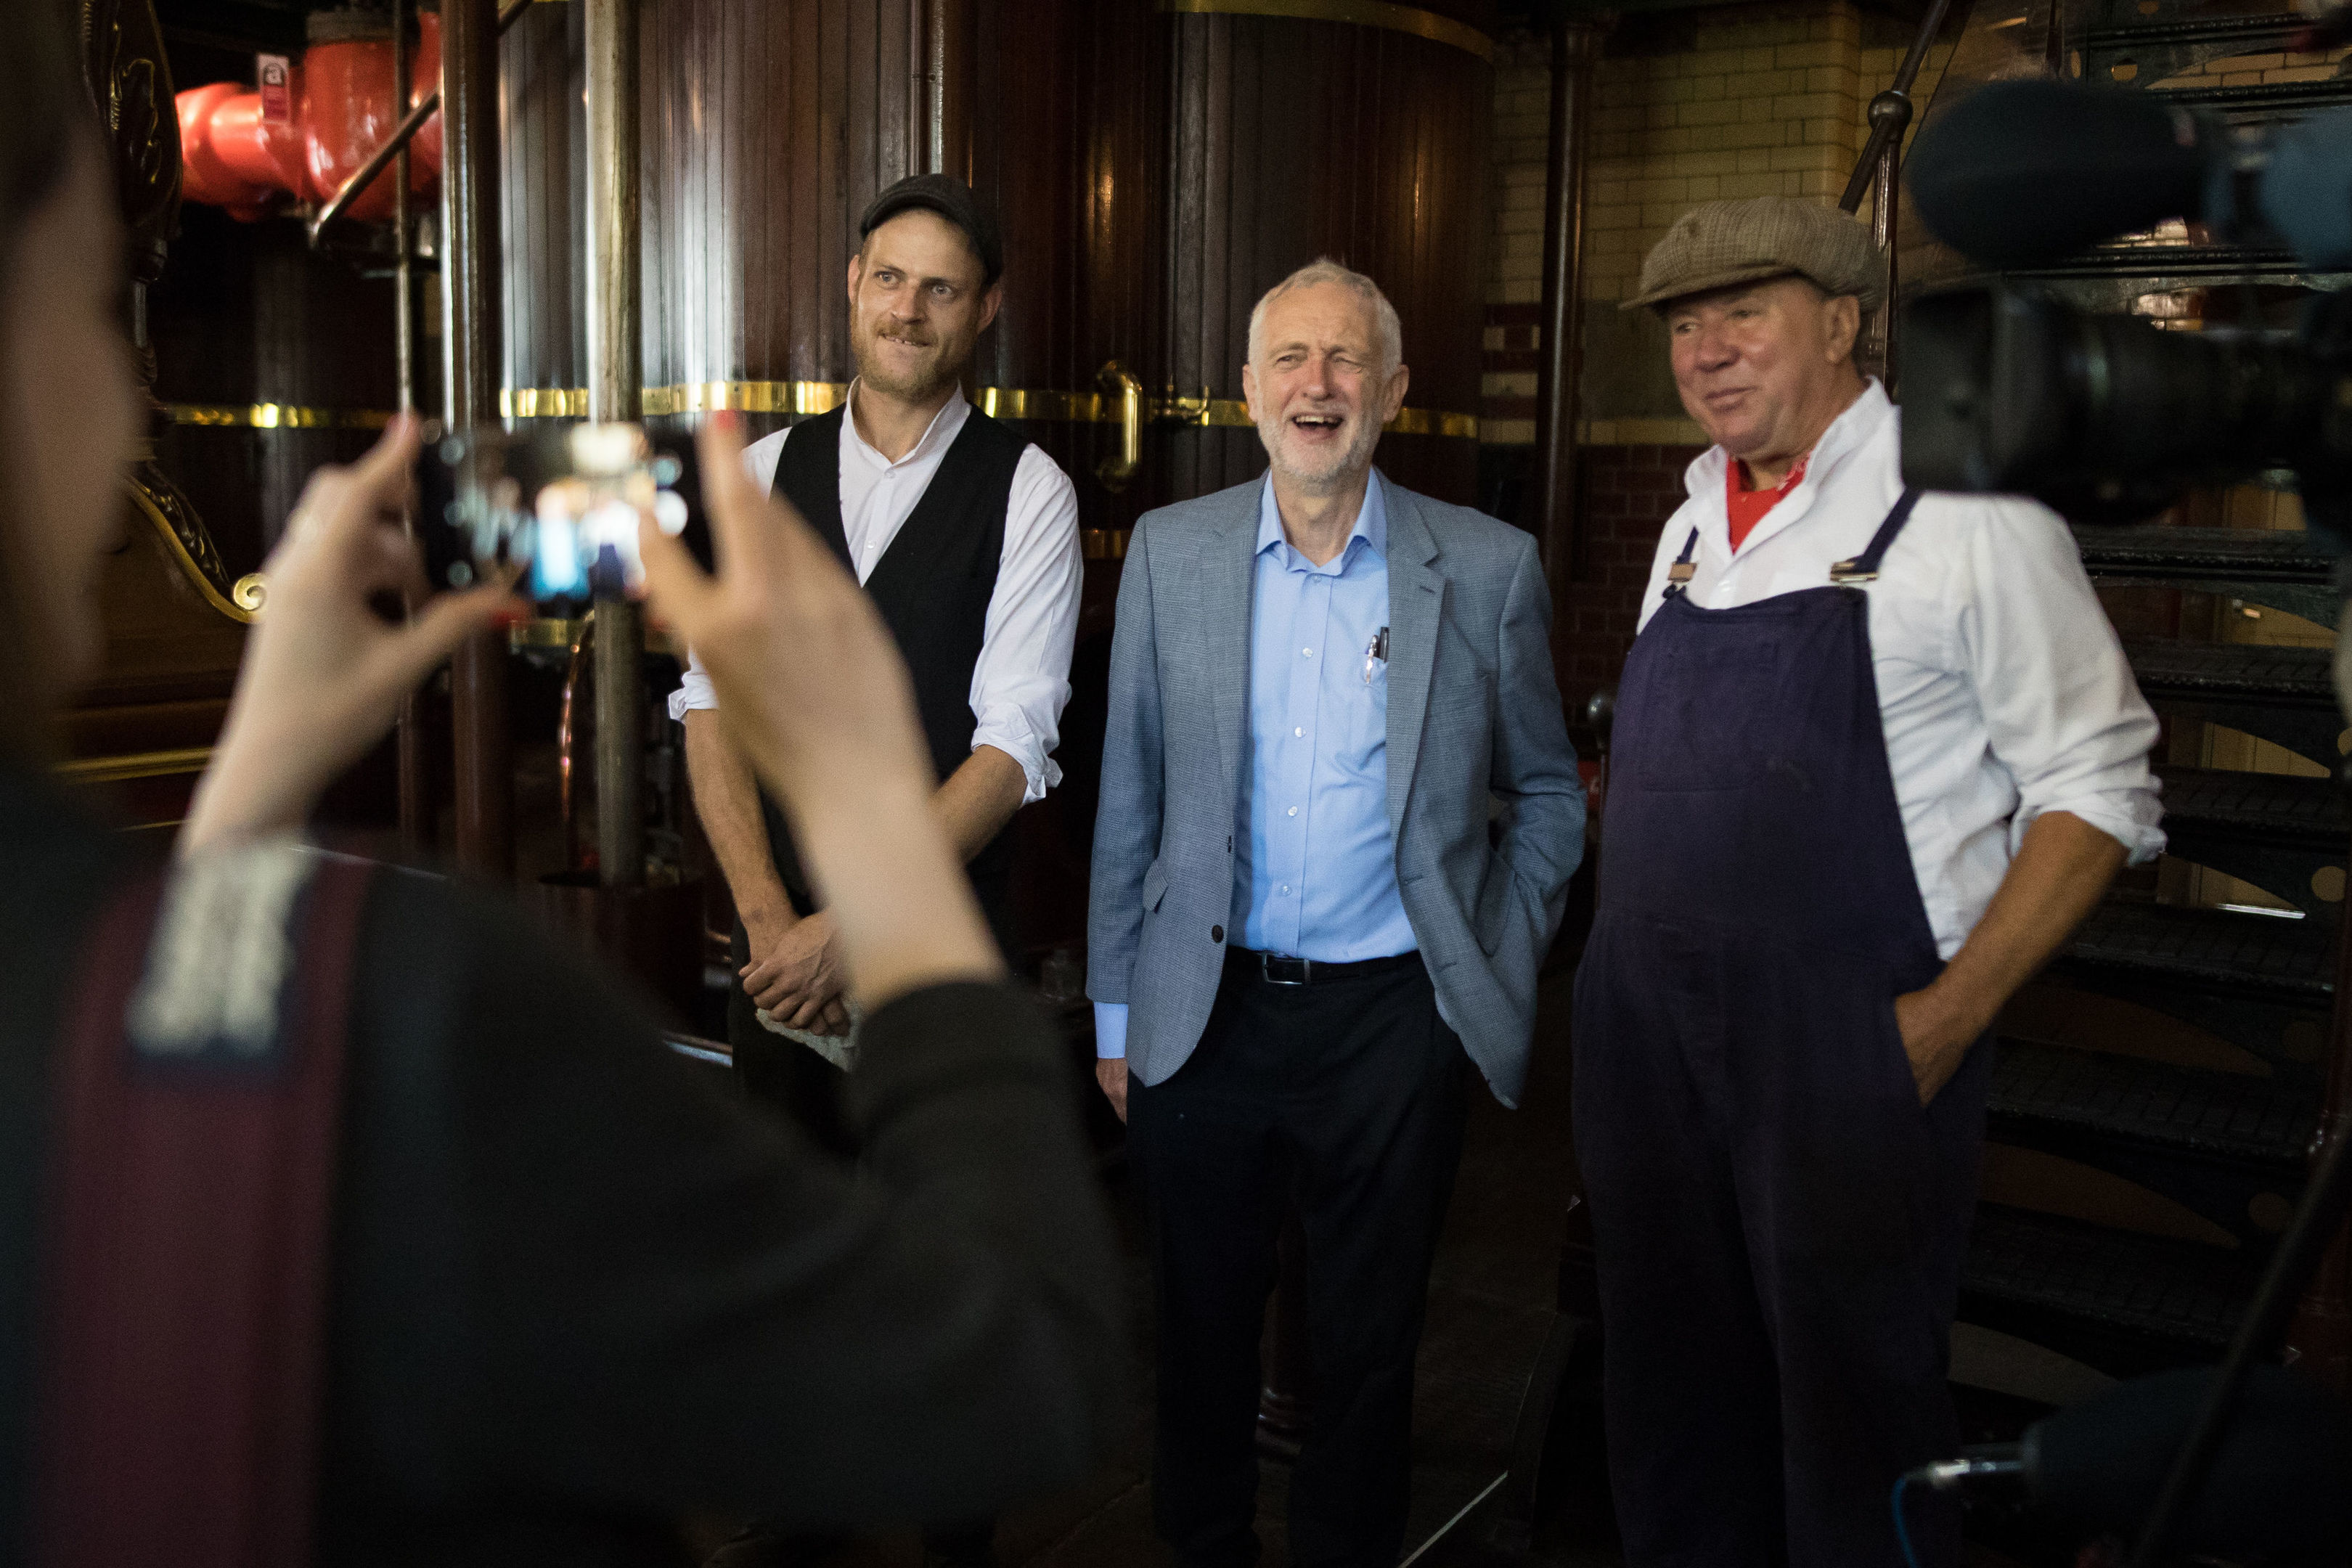 Labour Leader Jeremy Corbyn poses for a picture with pump station volunteers as he is shown around Abbey Pumping Station in Leicester's Museum of Science and Technology, Leicester as he announces the Labour Party's plans for taking the water industry into public ownership. (Aaron Chown/PA)